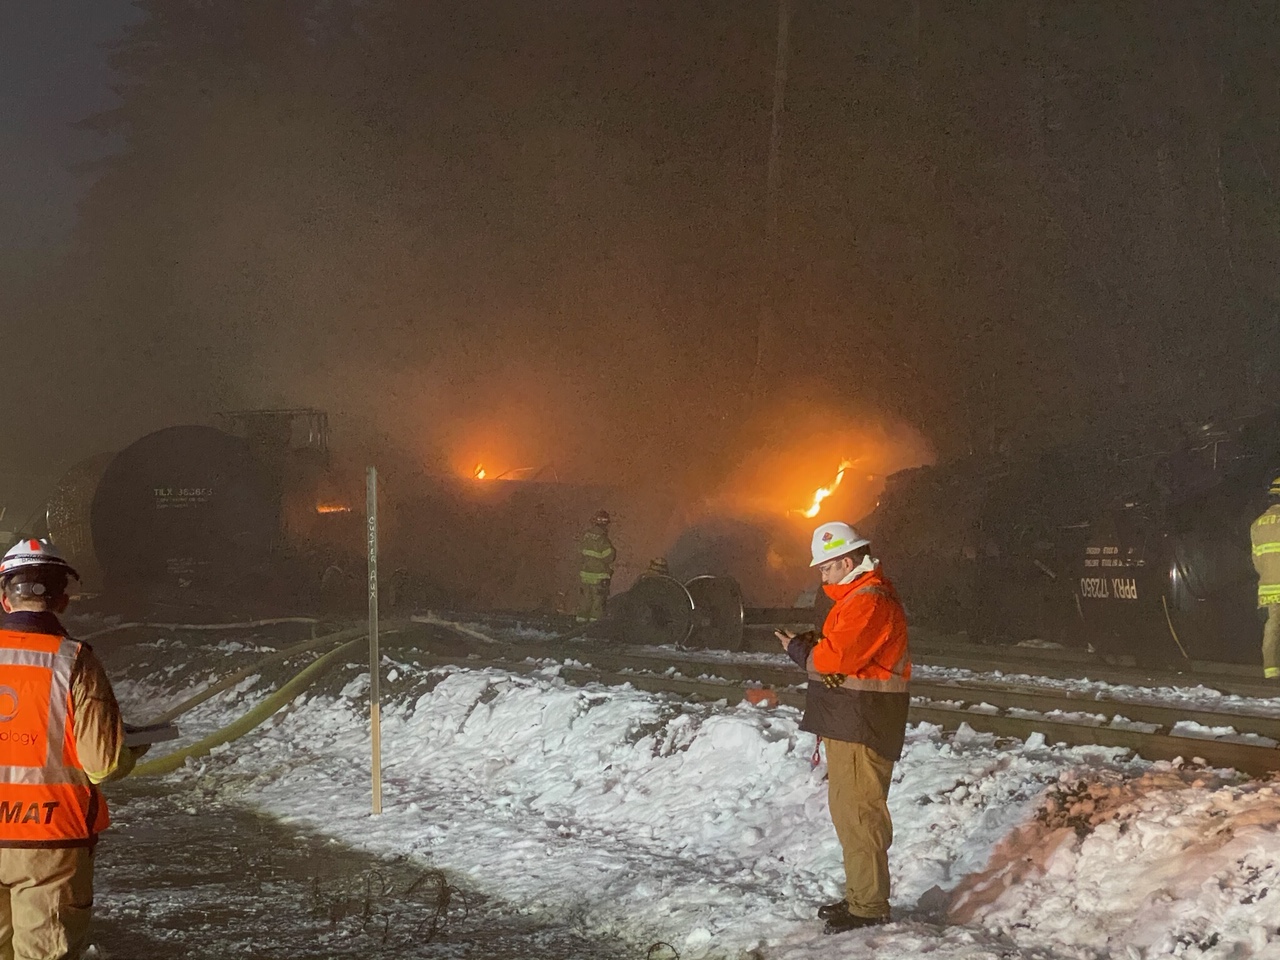 Firefighters in front of a derailed train on fire at night